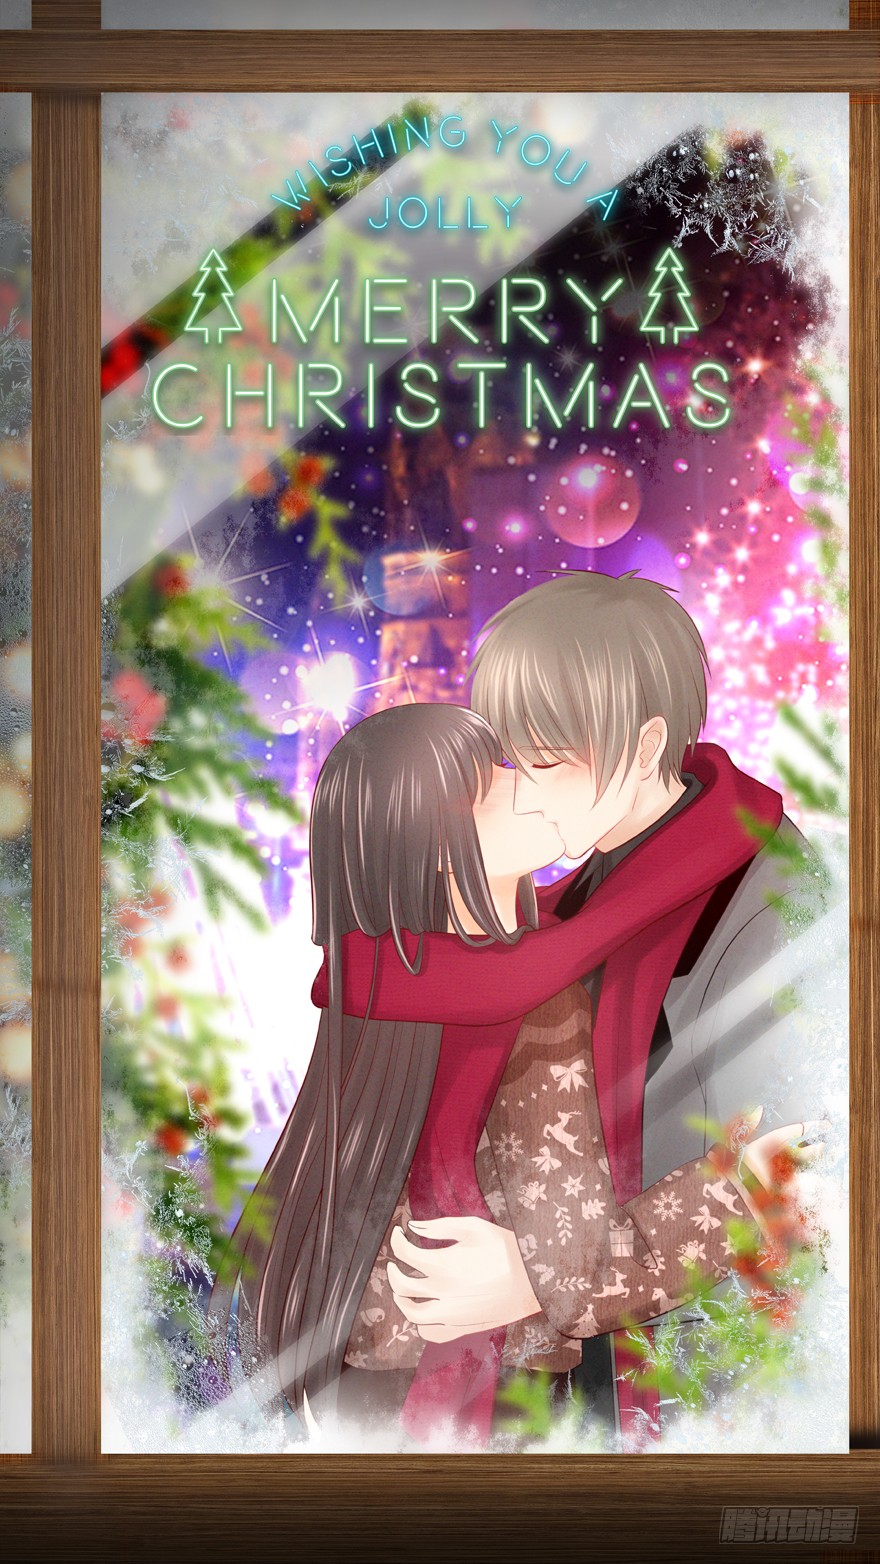 Reluctant To Go Ch. 37 Merry Christmas!